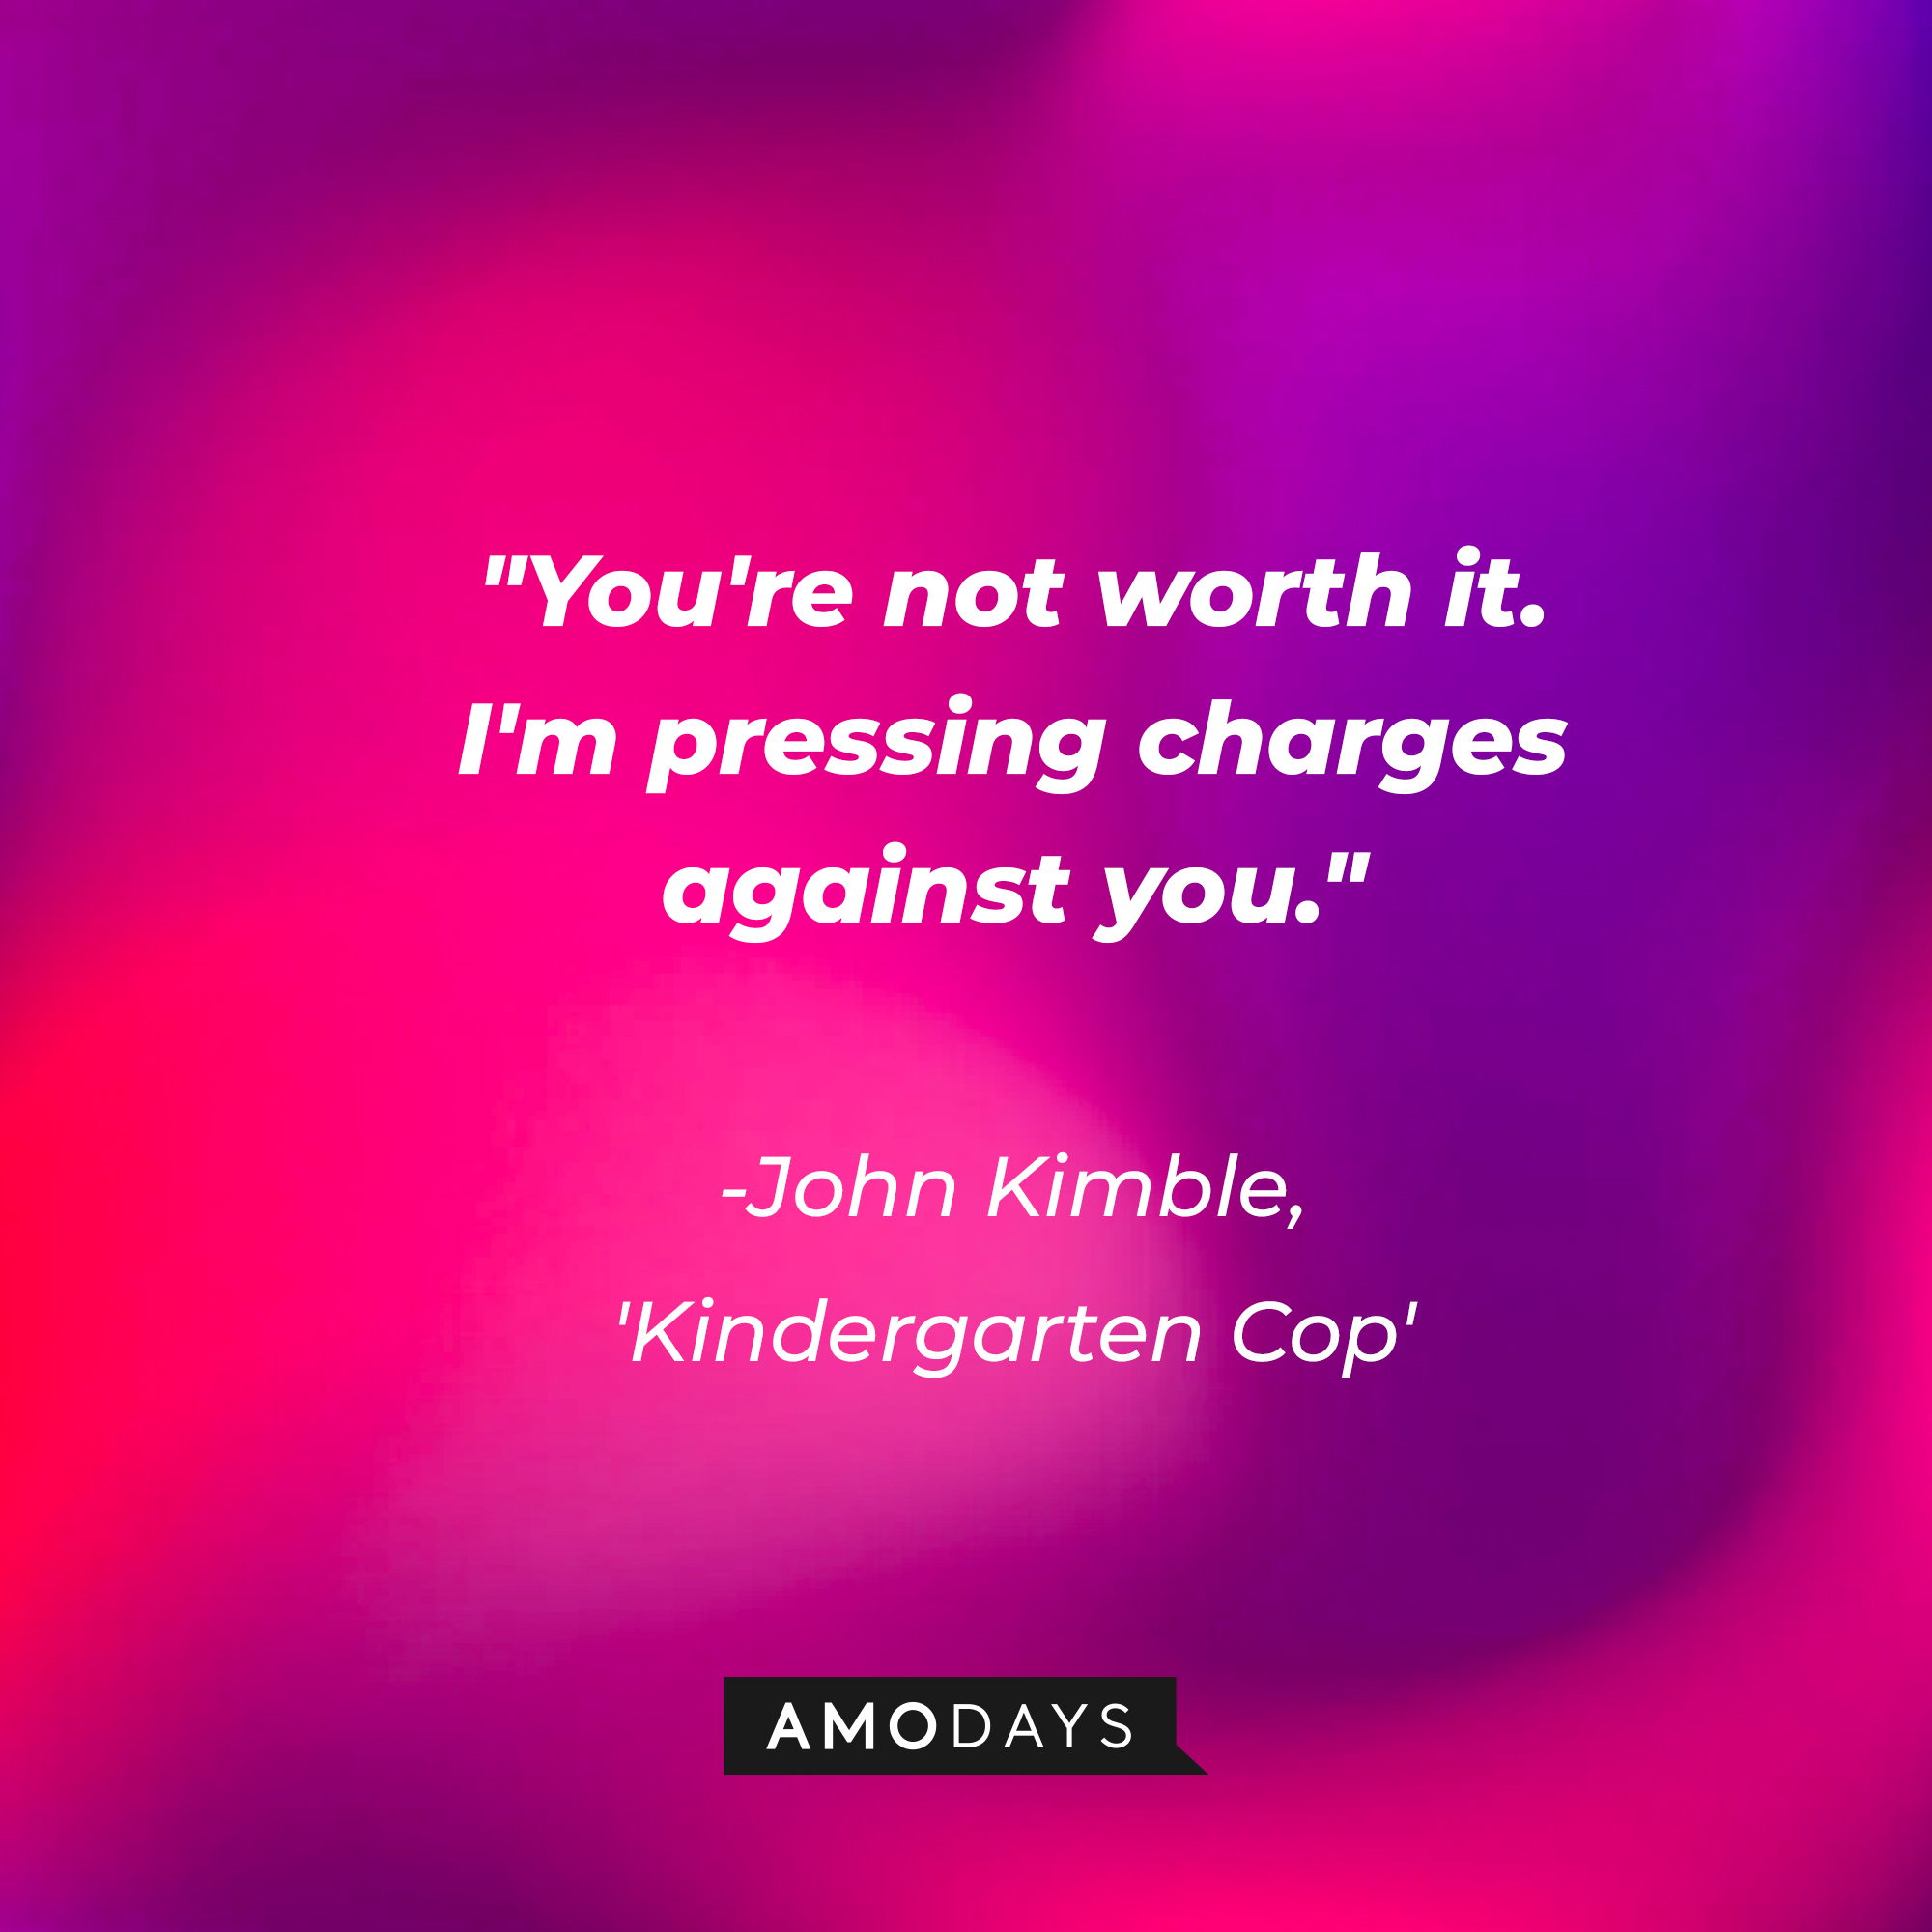 John Kimble's quote in "Kindergarten Cop:" "You're not worth it. I'm pressing charges against you."  | Source: AmoDays